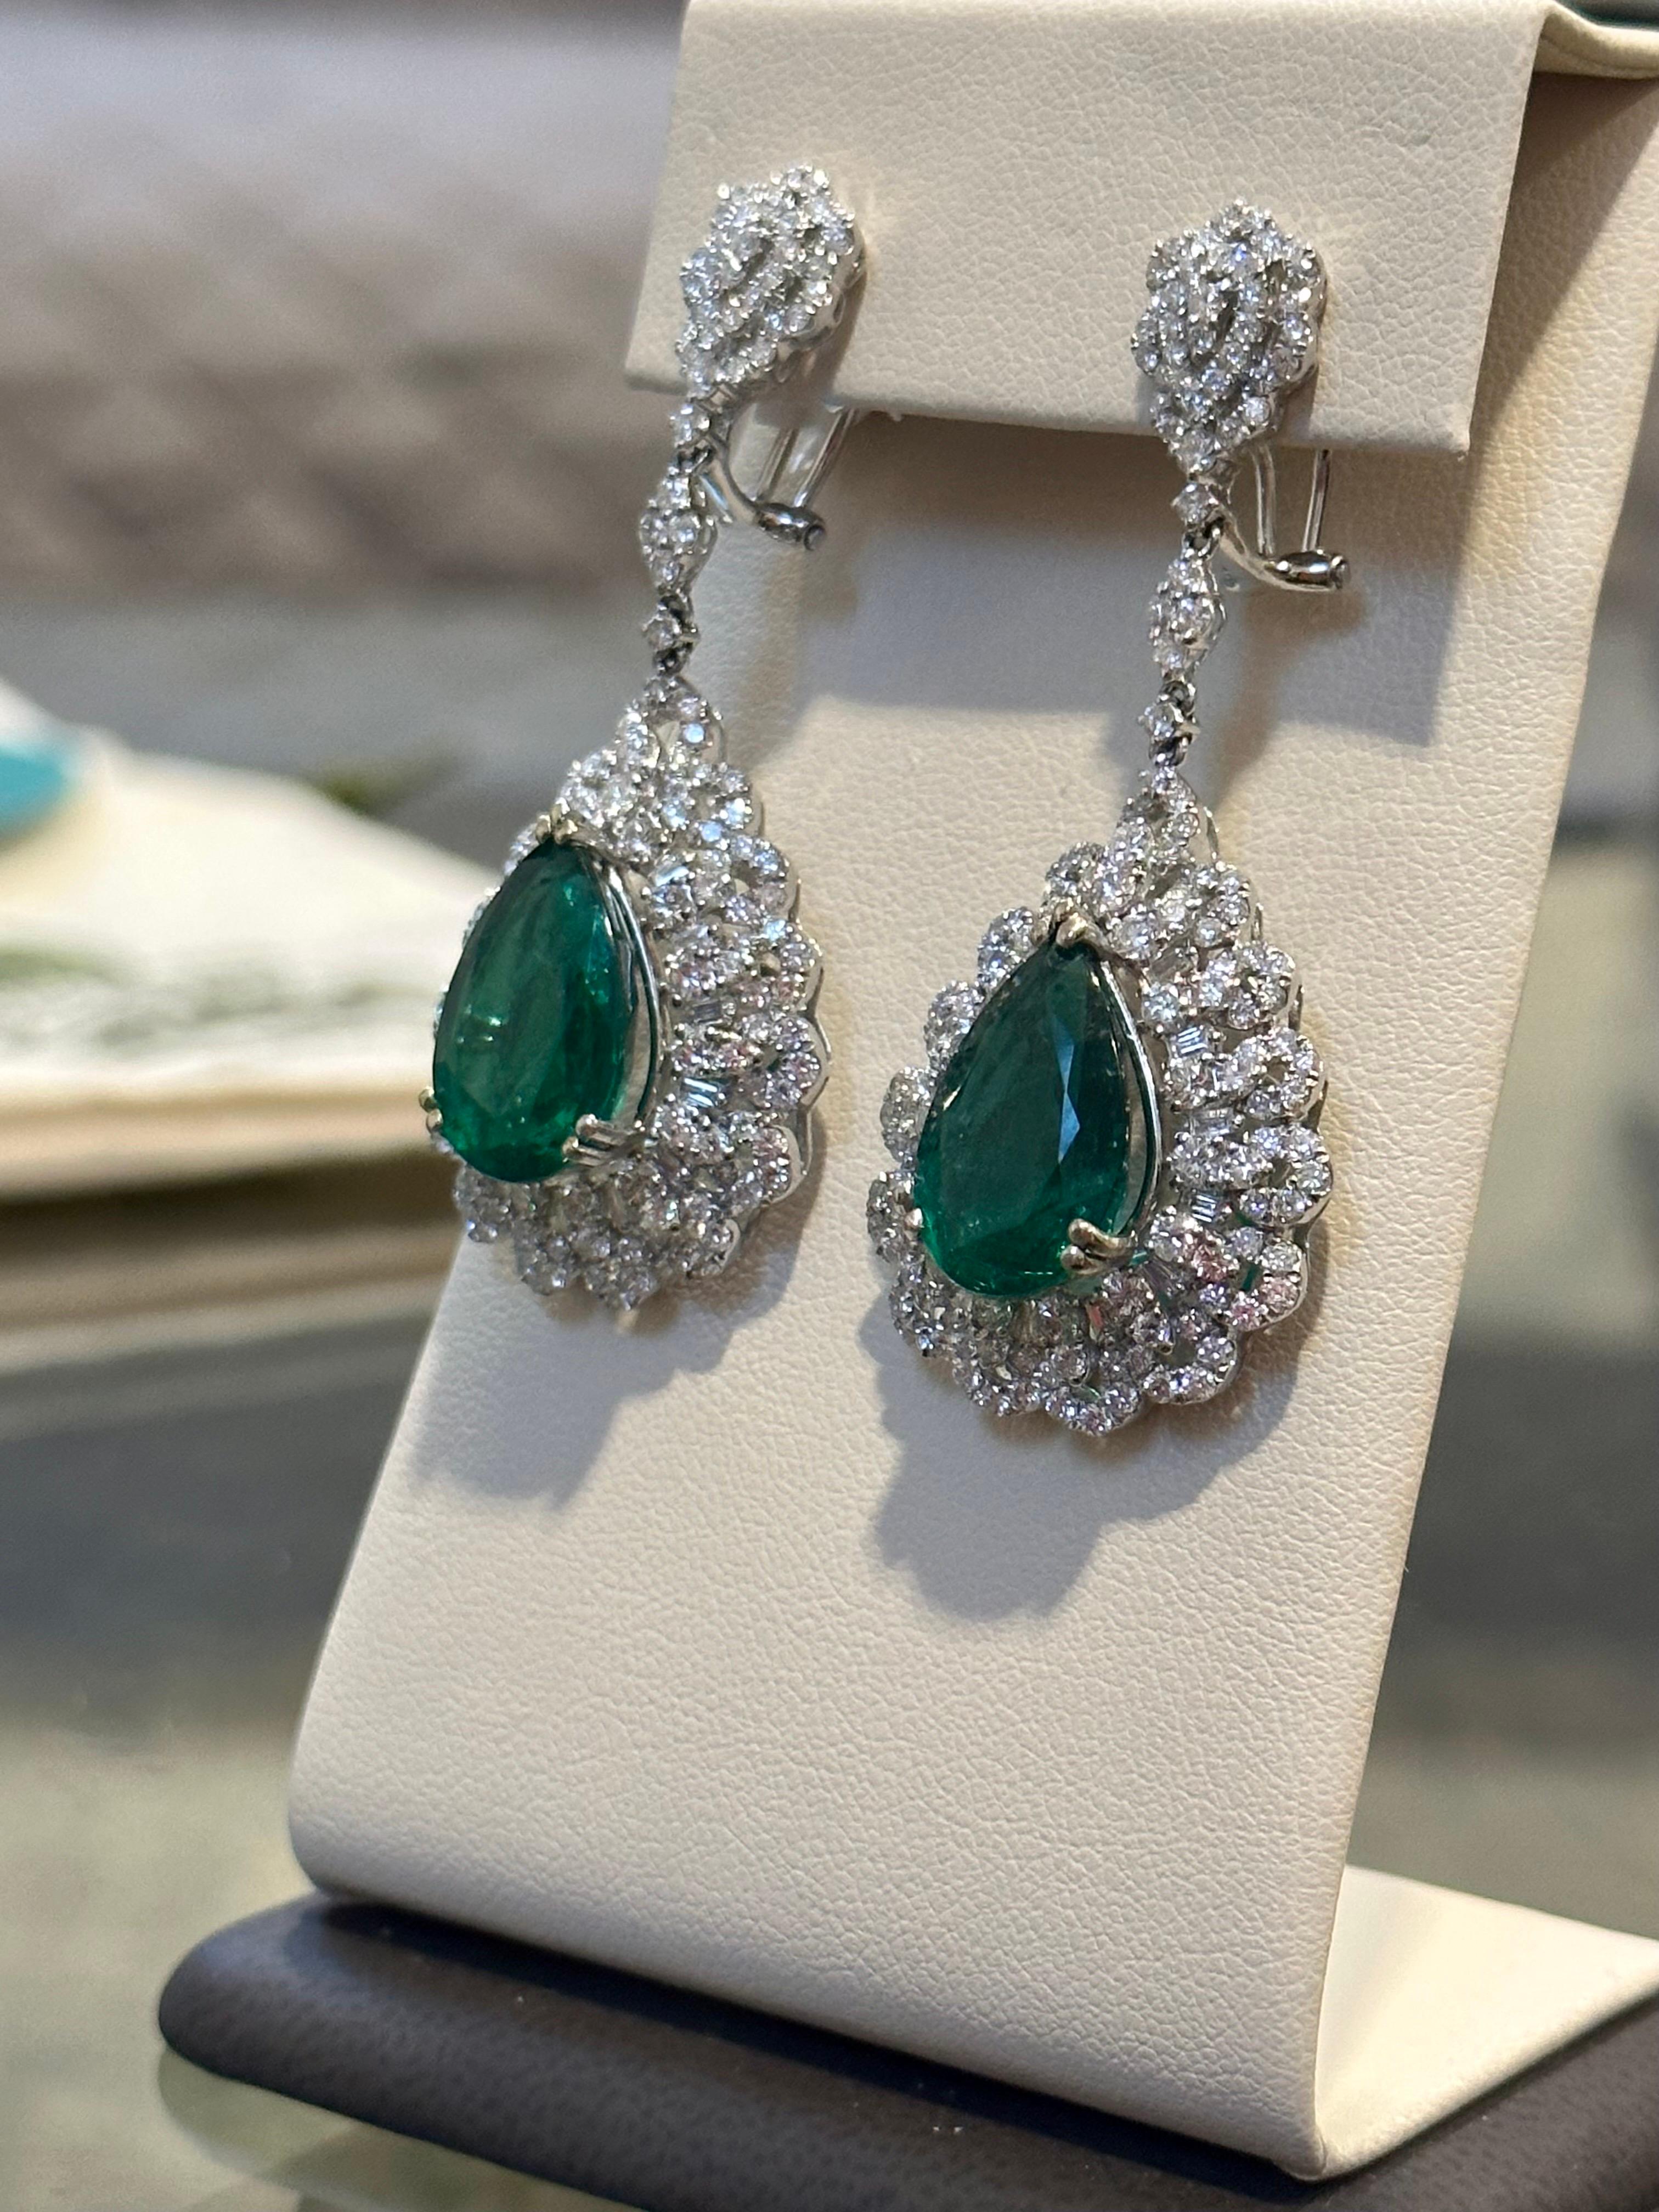 GIA Certified 14Ct Pear/Drop Zambian Emerald 7 Ct Diamond  Earrings 18 Kt Gold In Excellent Condition For Sale In New York, NY